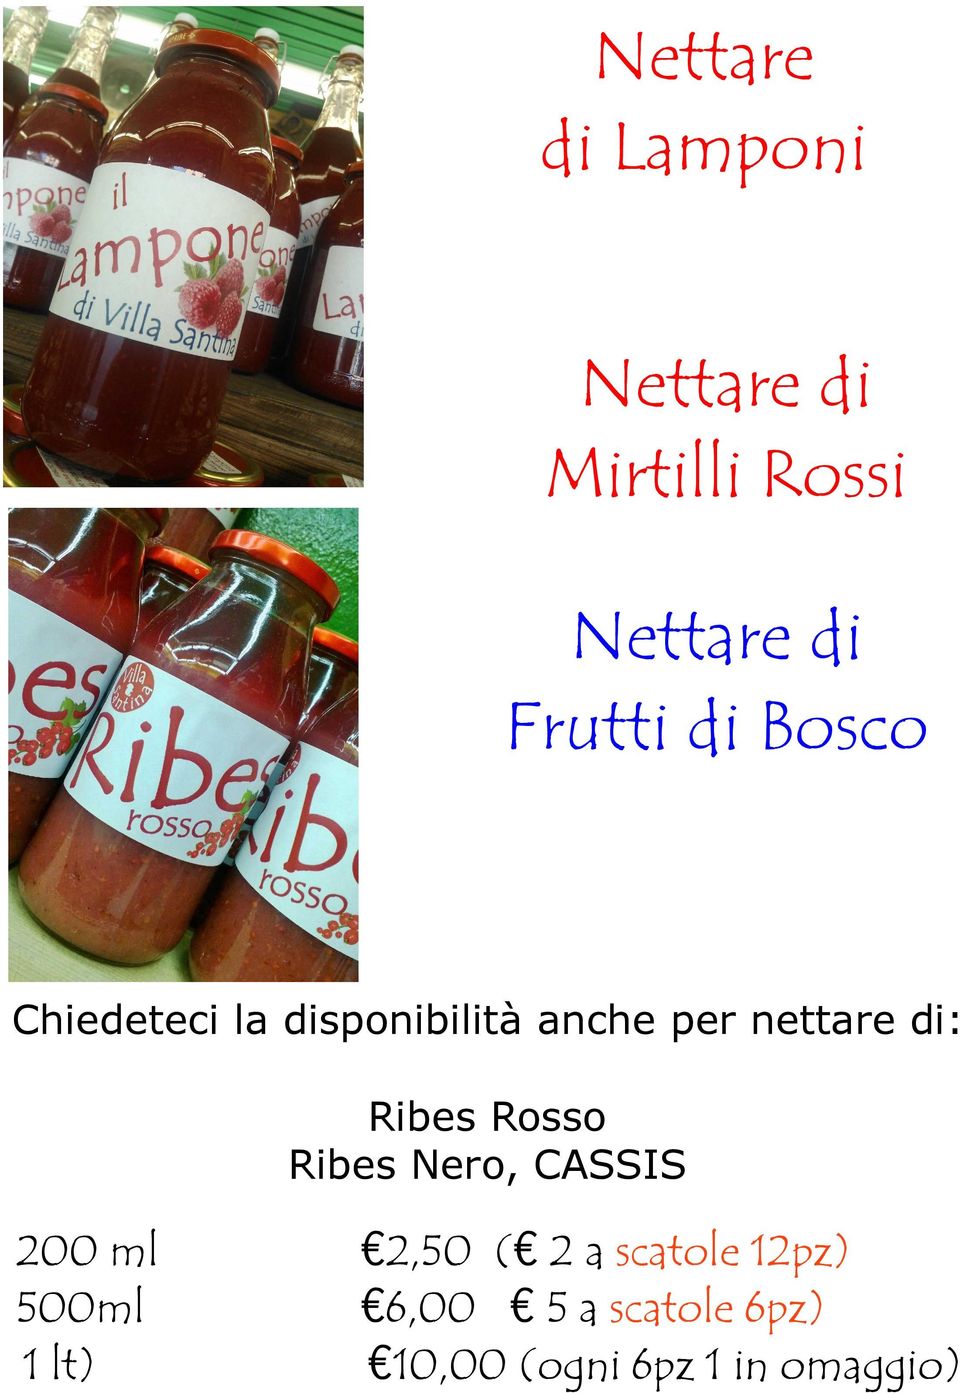 di: Ribes Rosso Ribes Nero, CASSIS 200 ml 500ml 1 lt) 2,50 (